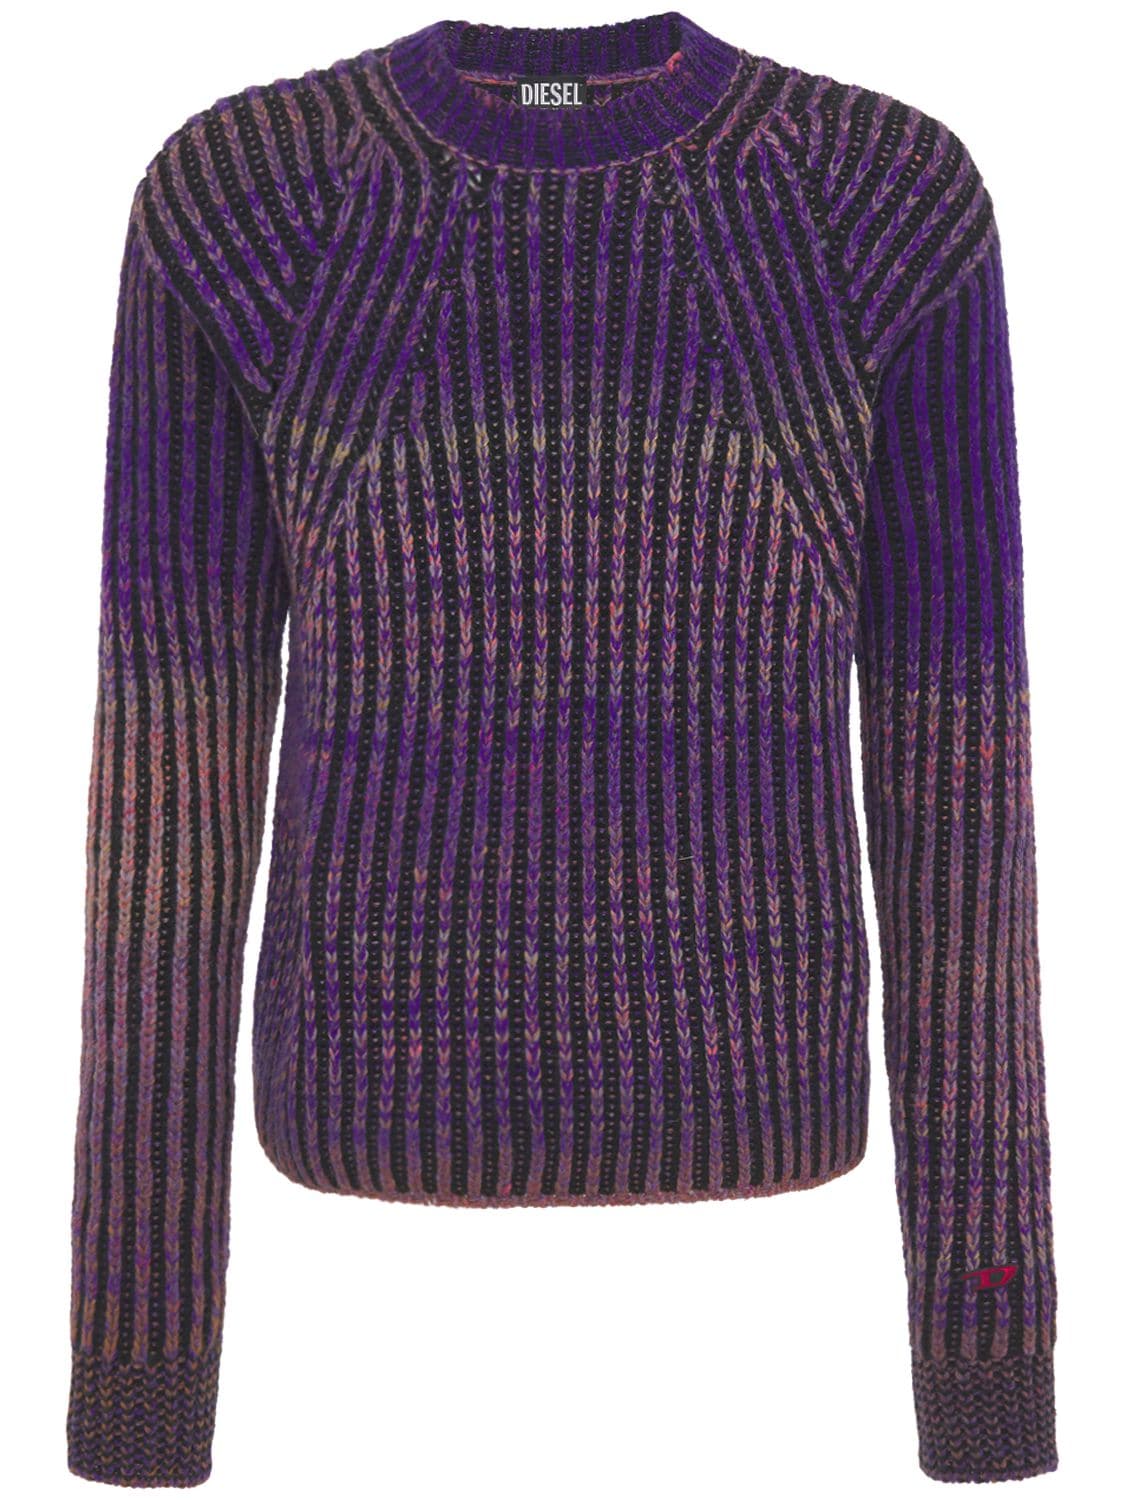 Printed Wool Blend Knit Sweater